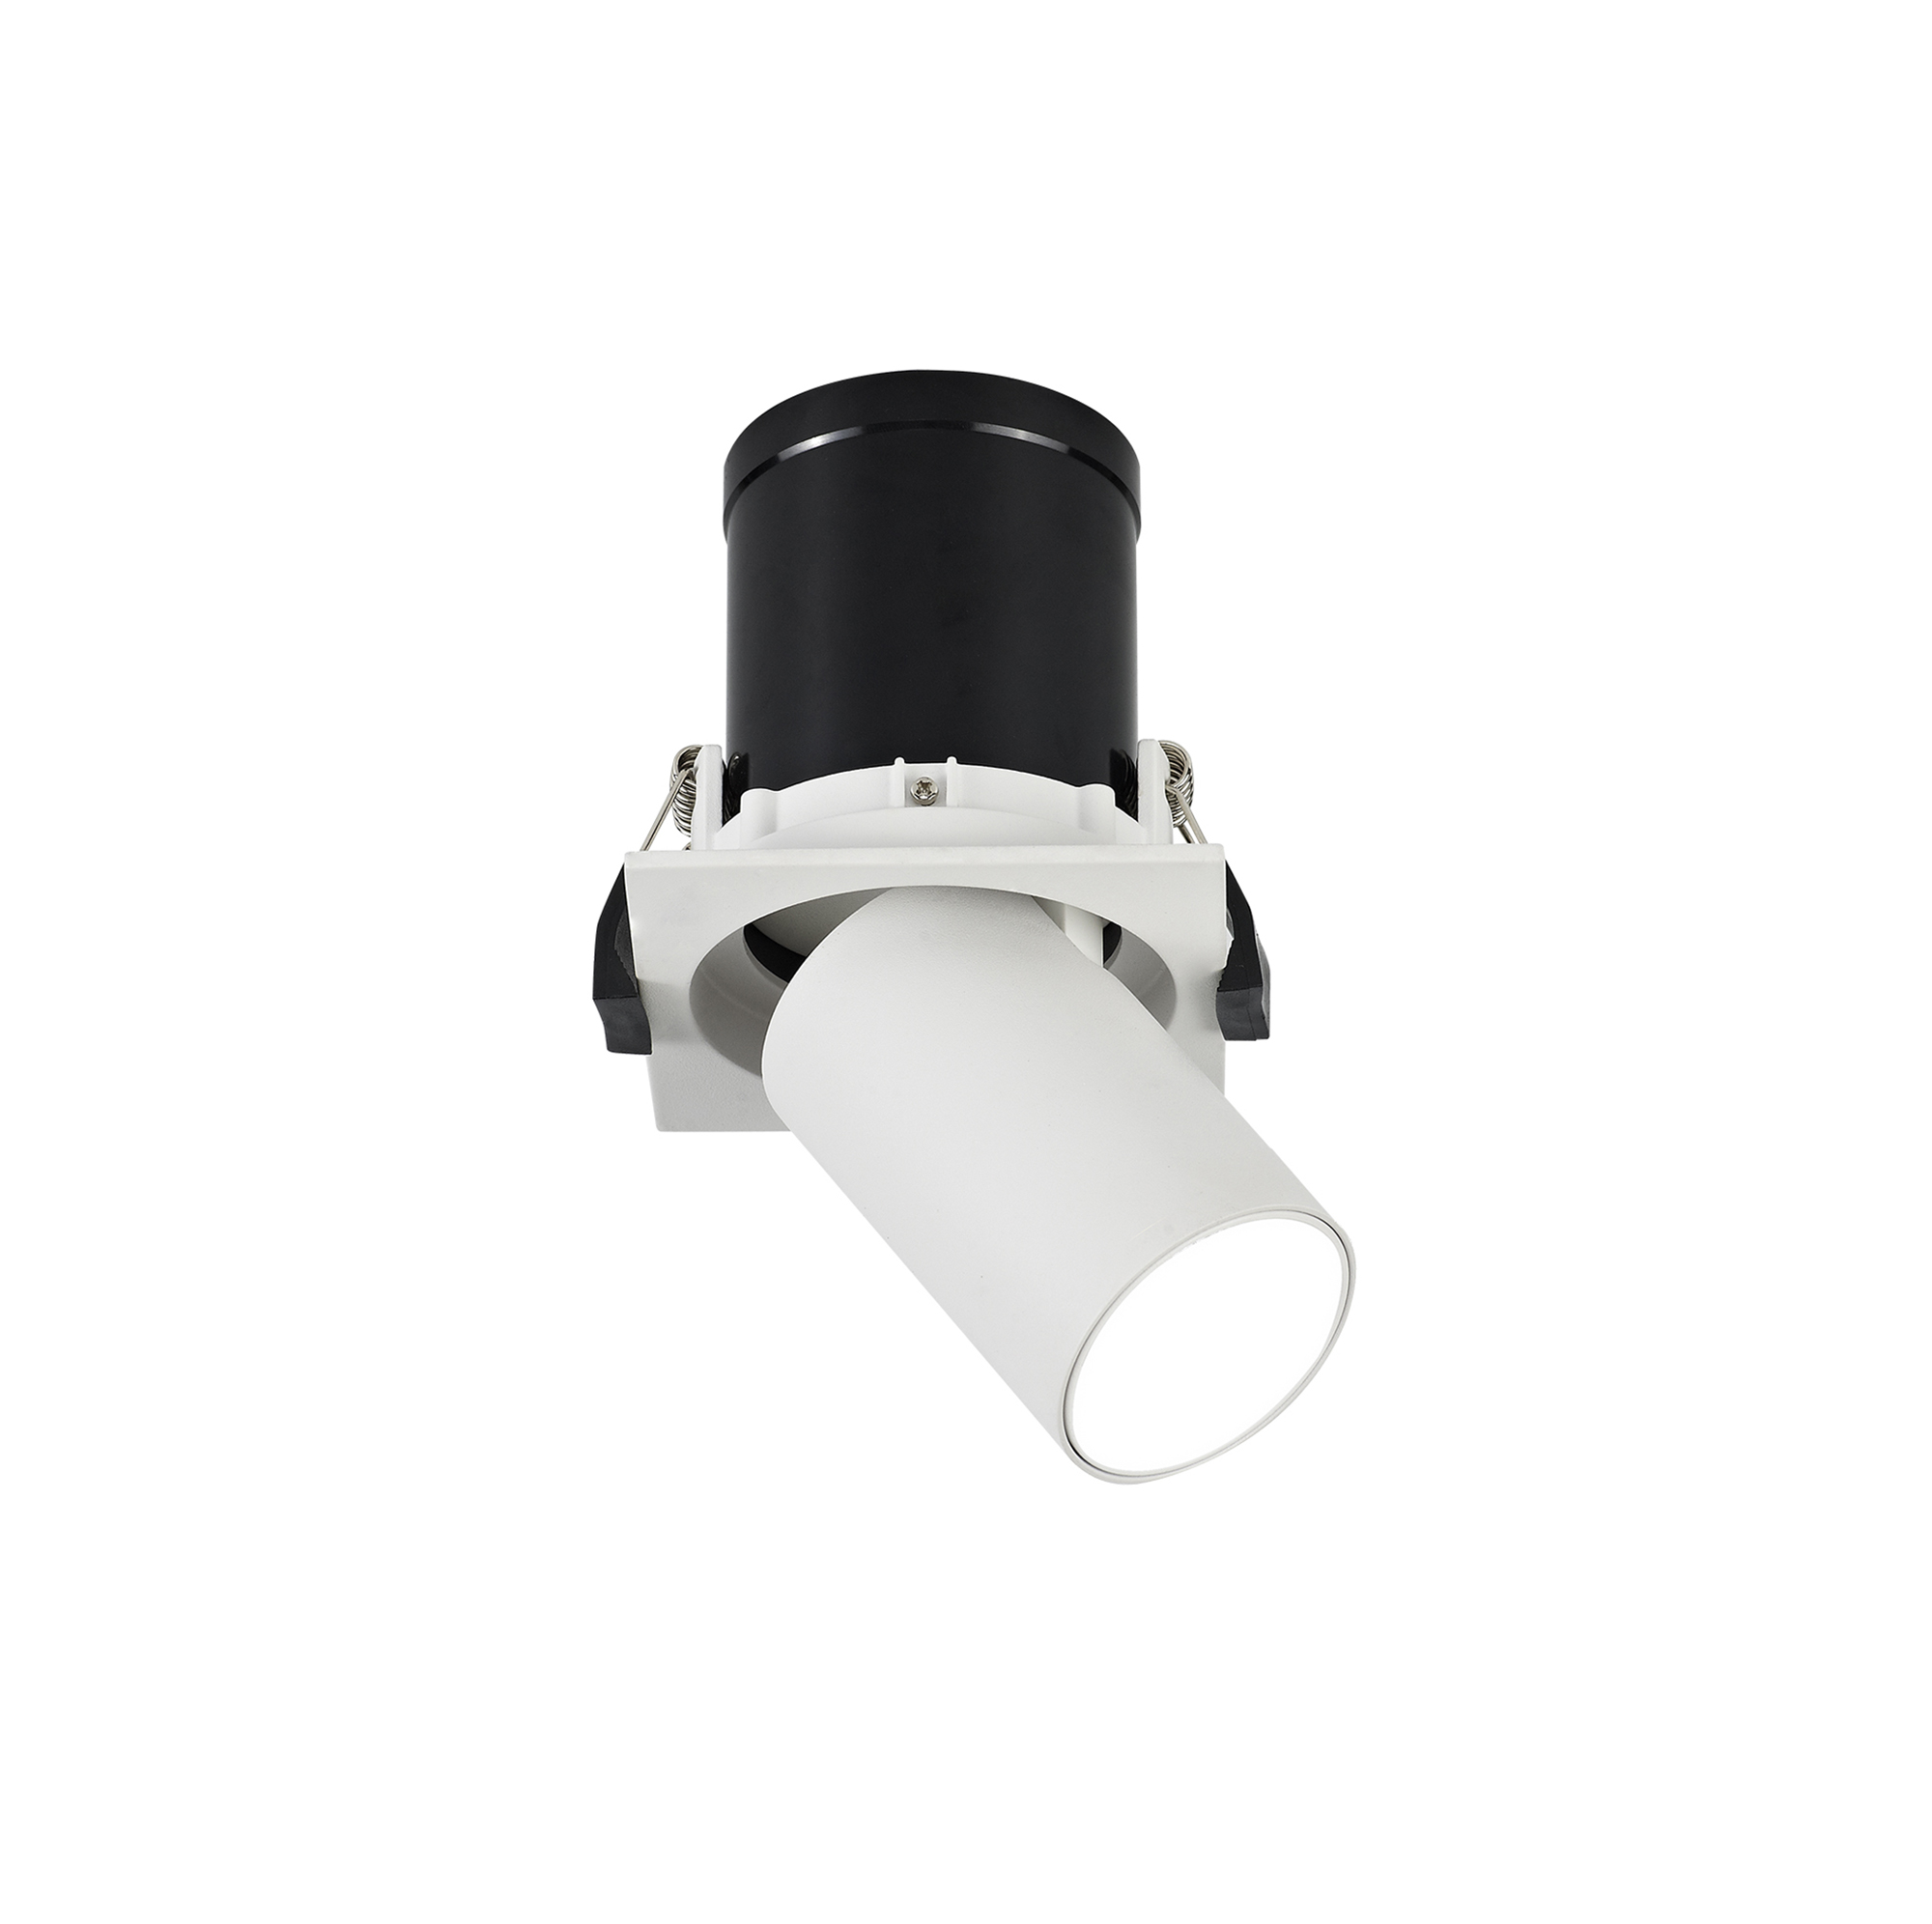 DX200375  Barda Retractable Recessed Swivel Square Spotlight; 8W; 4000K; 24°;585lm;White & White; Dia: 85mm Cut Out 75mm; 3yrs Warranty